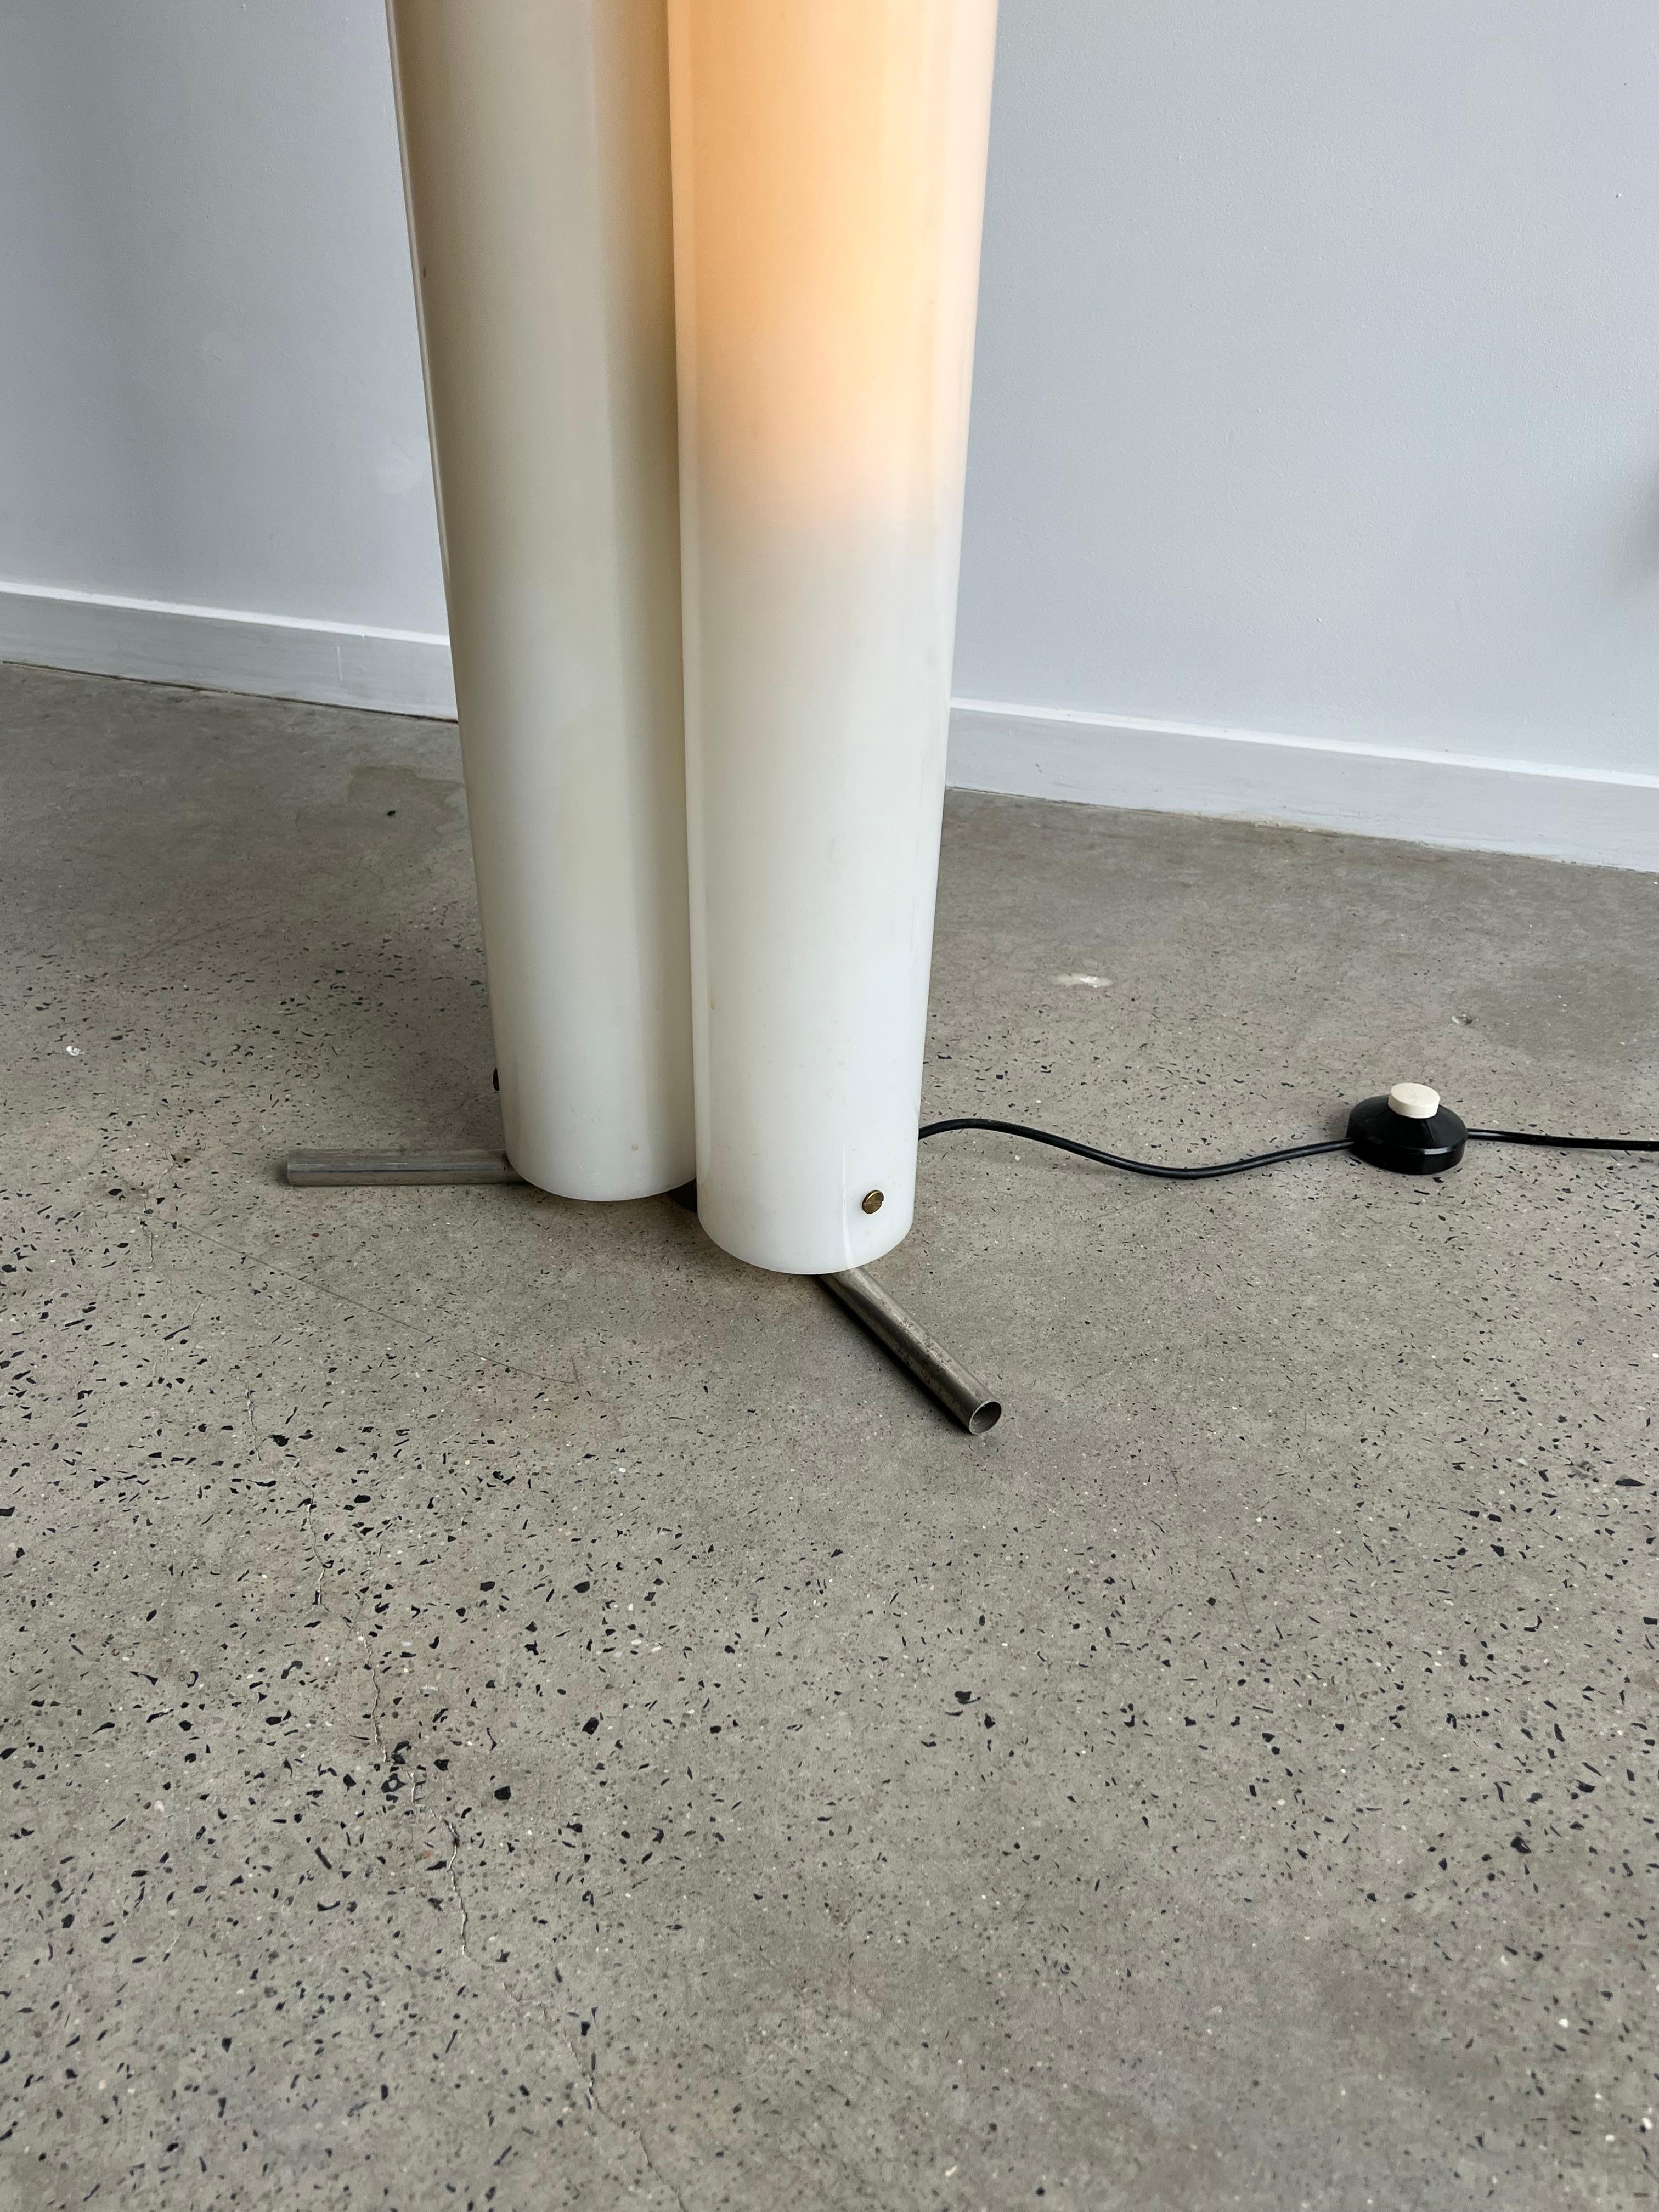 Mid-Century Modern Italian Chimera Floor Lamp by Vico Magistretti for Artemide First Edition, 1969 For Sale